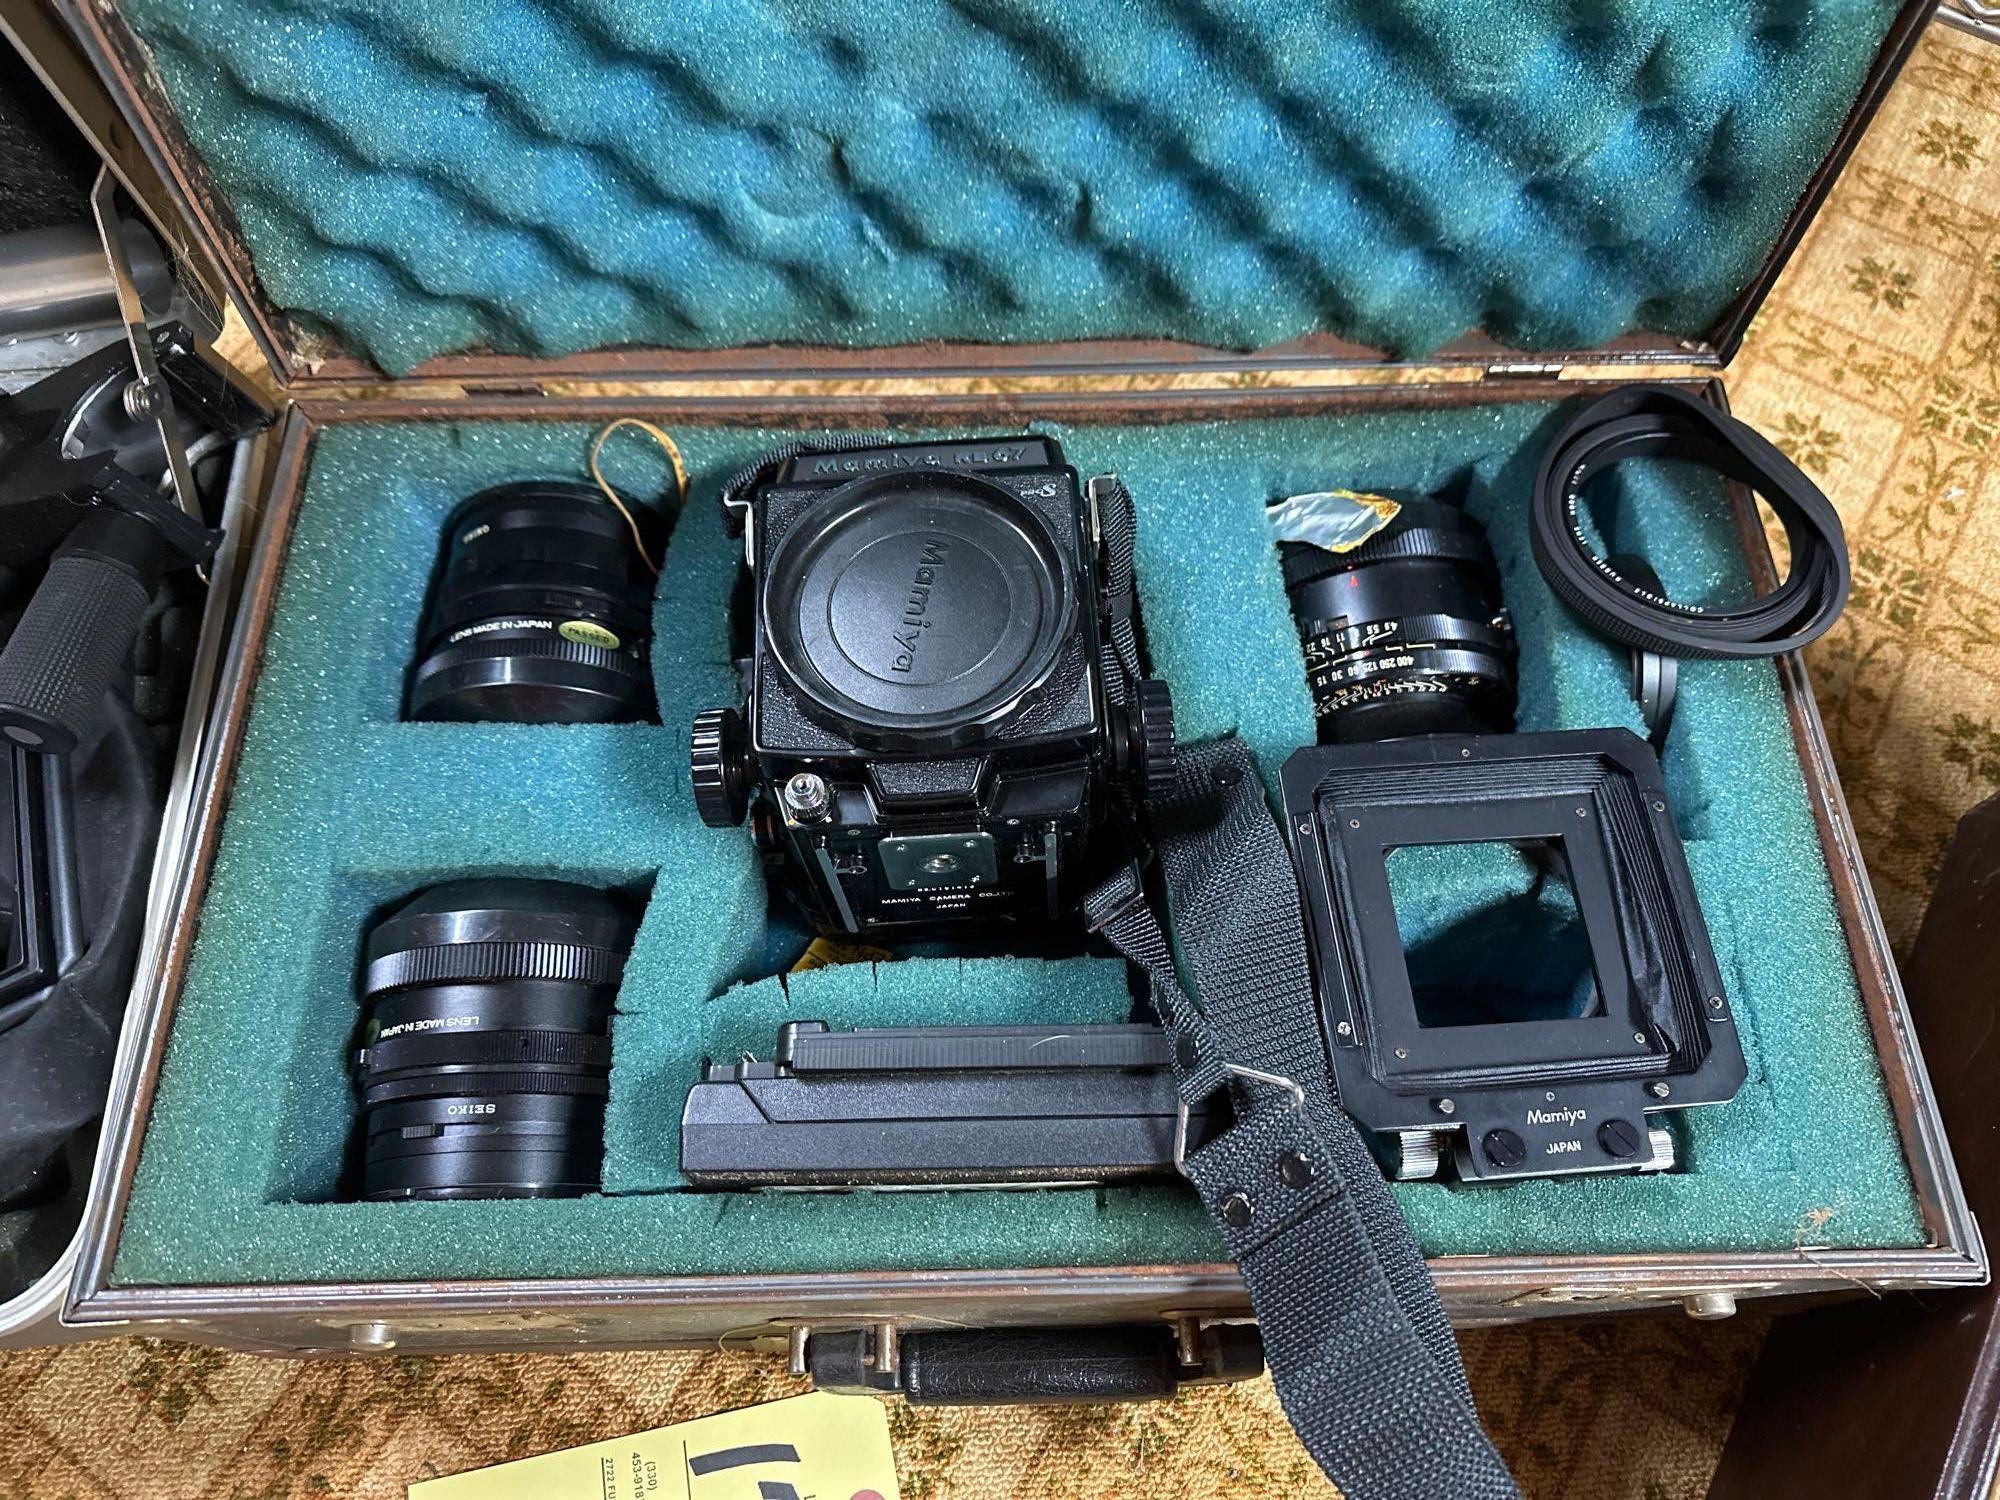 Mamiya RB67 camera with lenses and case